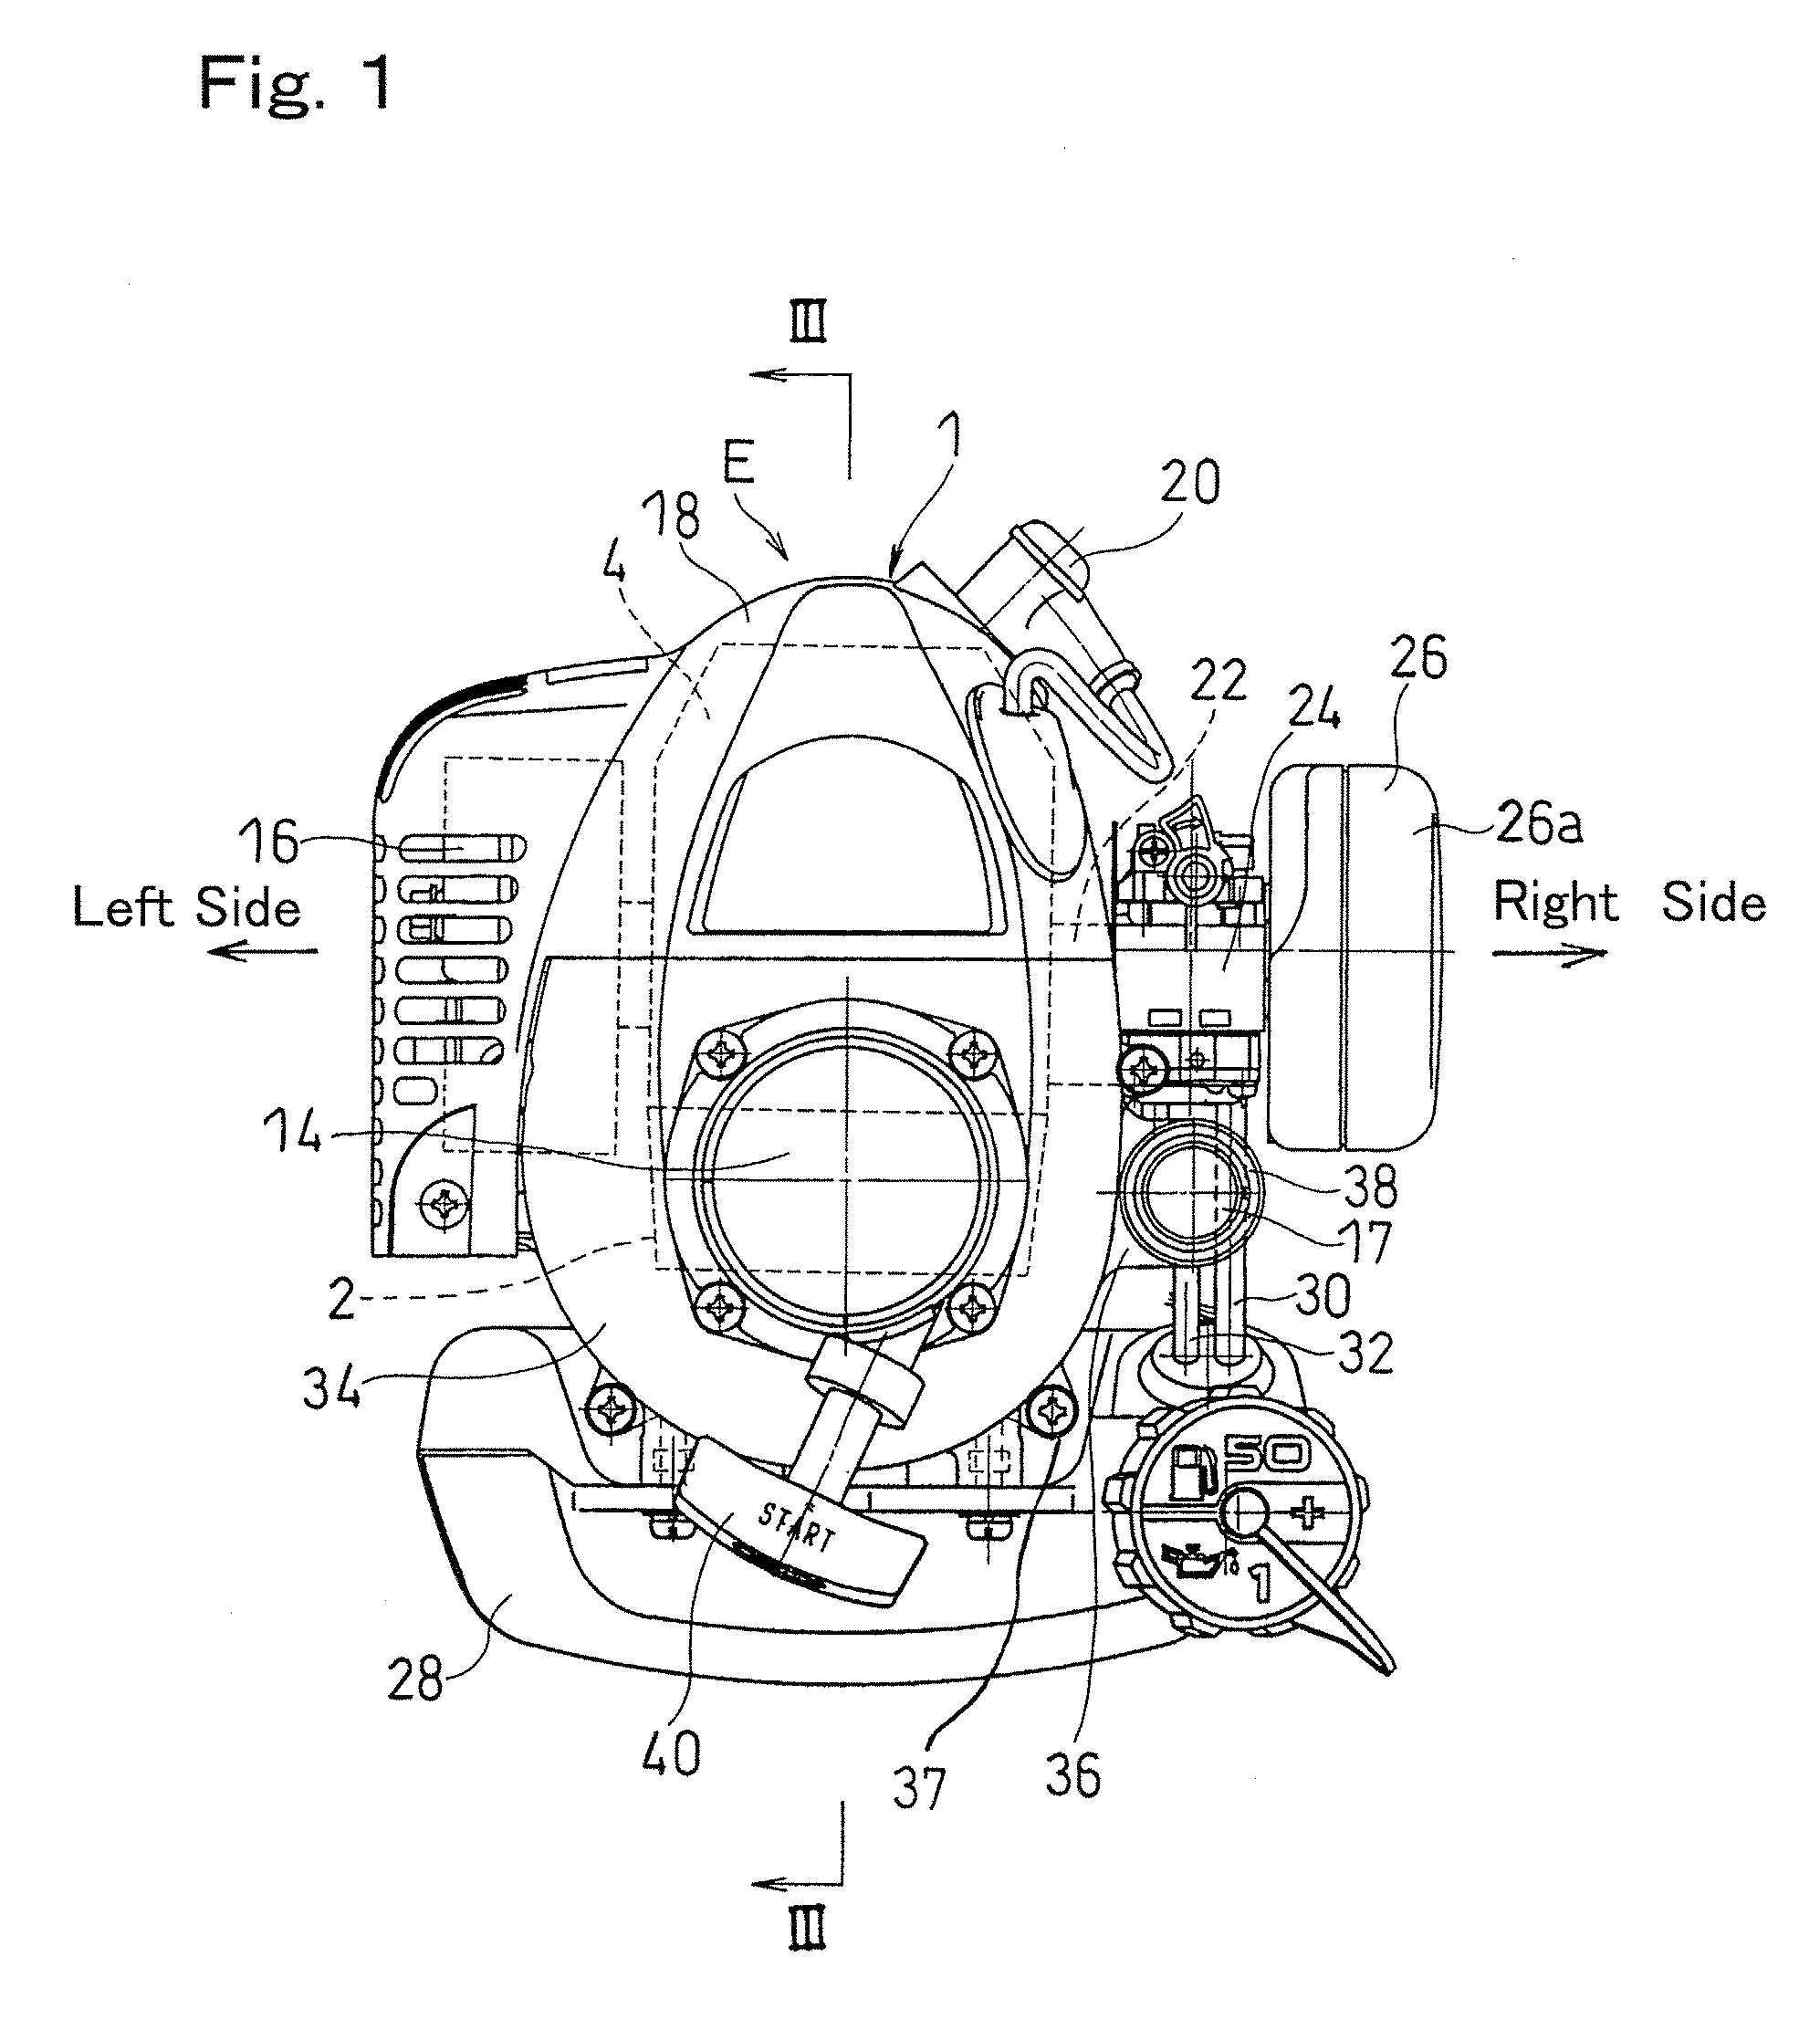 Combustion engine with a priming pump